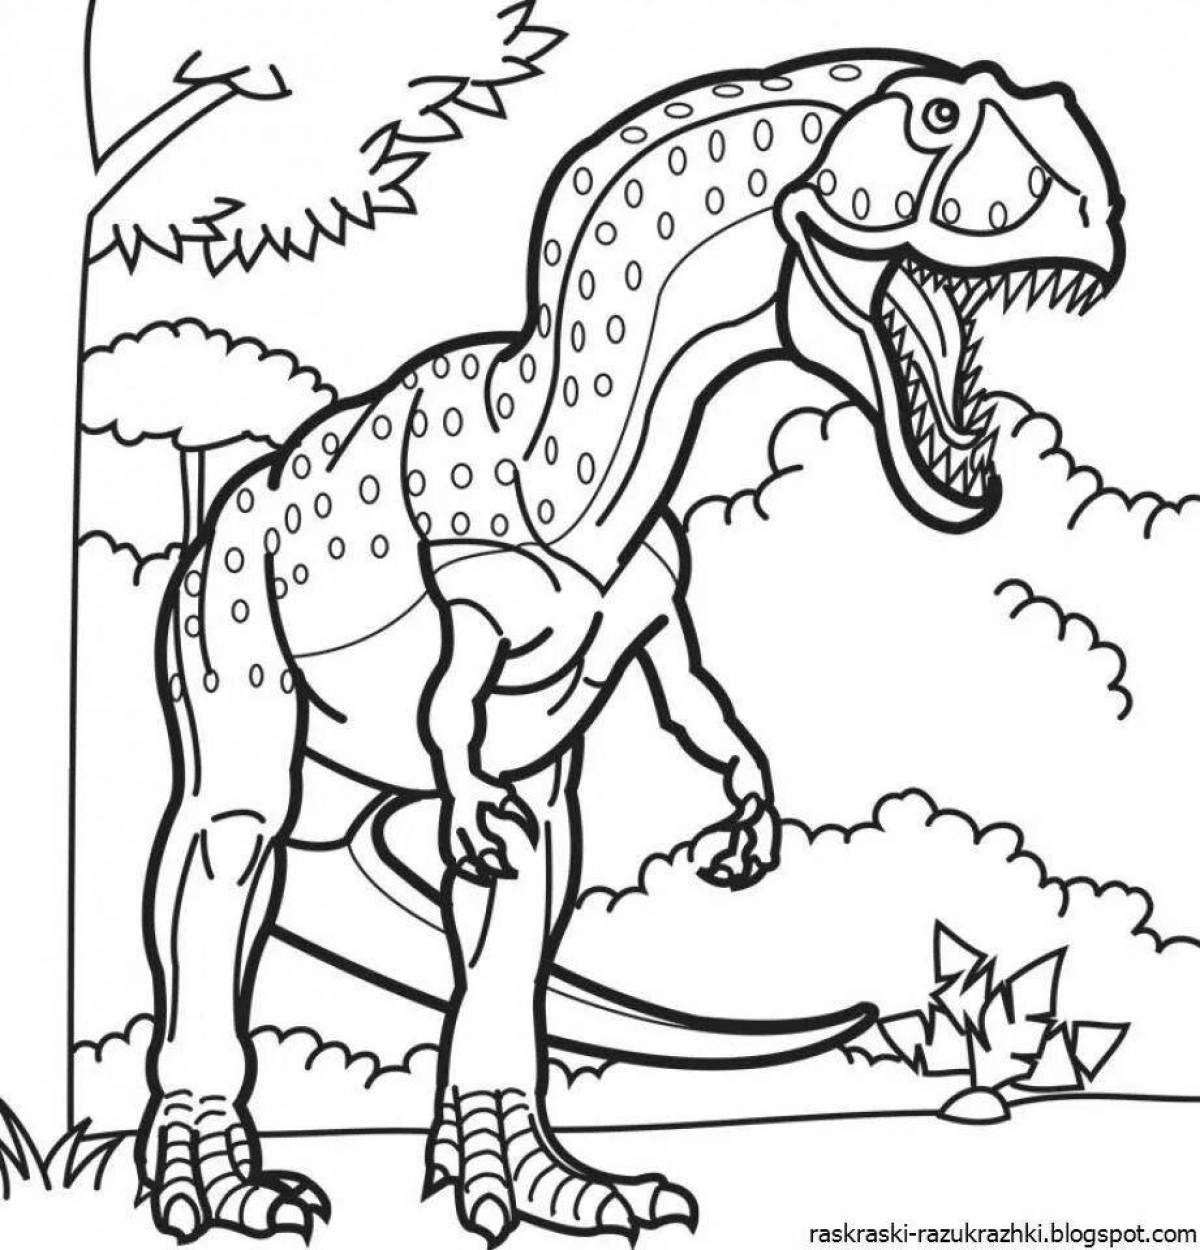 Amazing dinosaurs coloring book for boys 6-7 years old